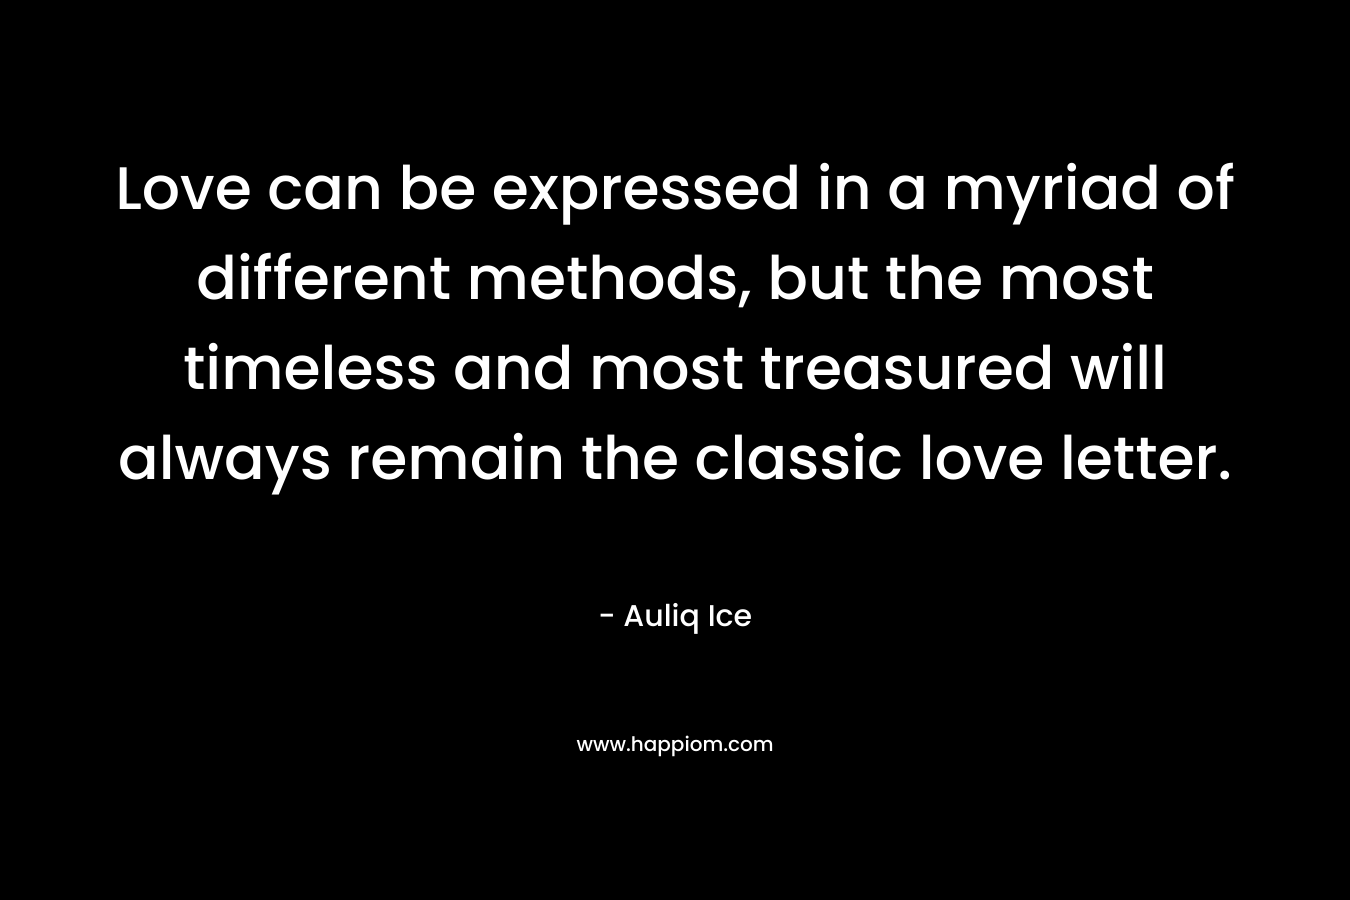 Love can be expressed in a myriad of different methods, but the most timeless and most treasured will always remain the classic love letter. – Auliq Ice